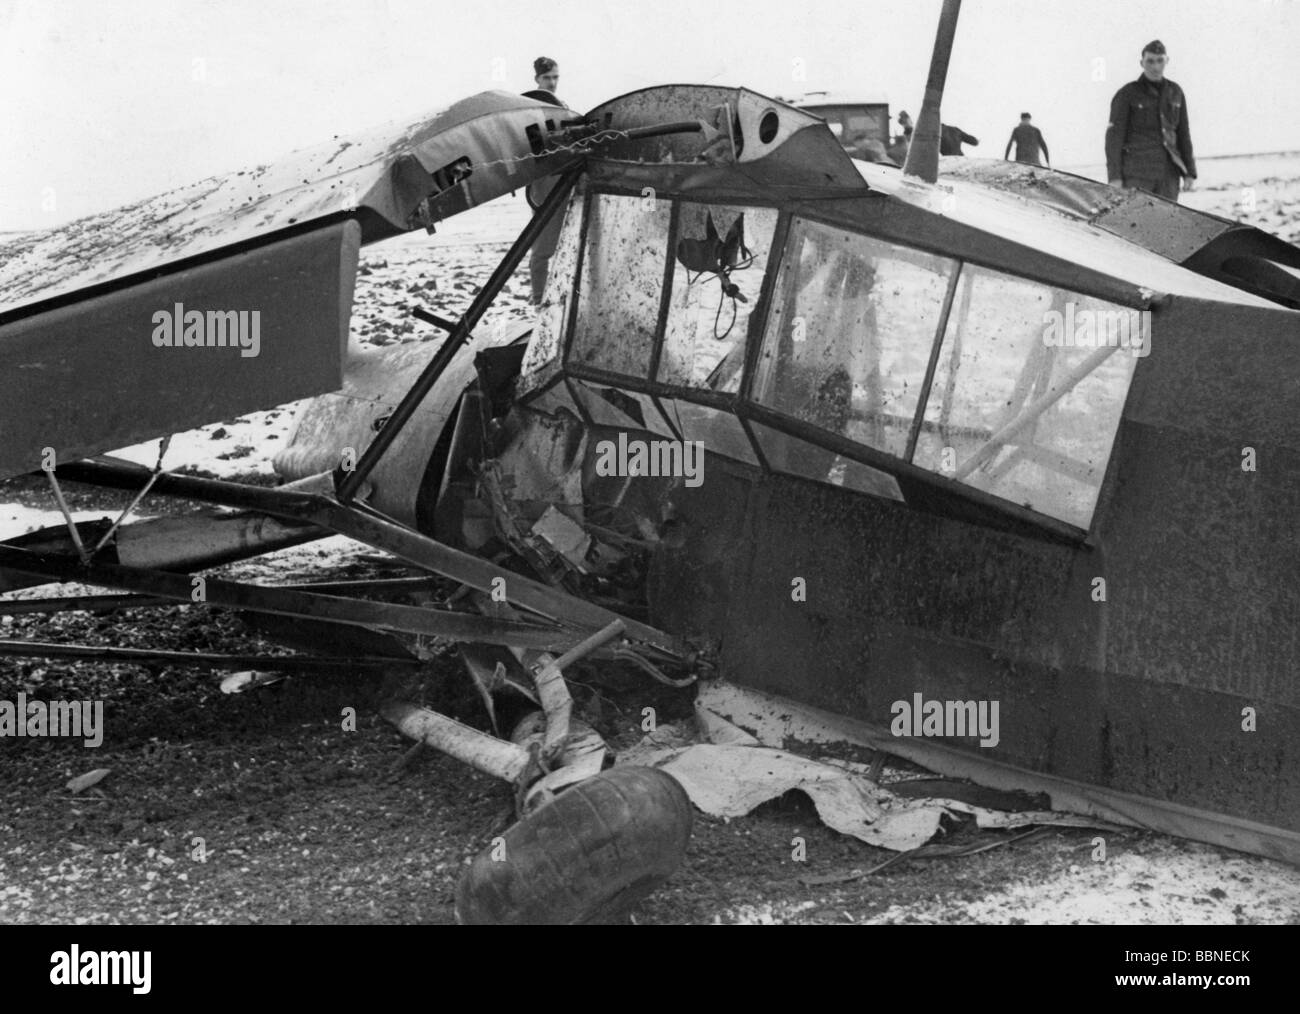 events, Second World War / WWII, aerial warfare, aircraft, crashed / damaged, German liaison aircraft Fieseler Fi 156 'Storch' (Stork), crashed on 23.2.1941 near Amiens, France, Stock Photo